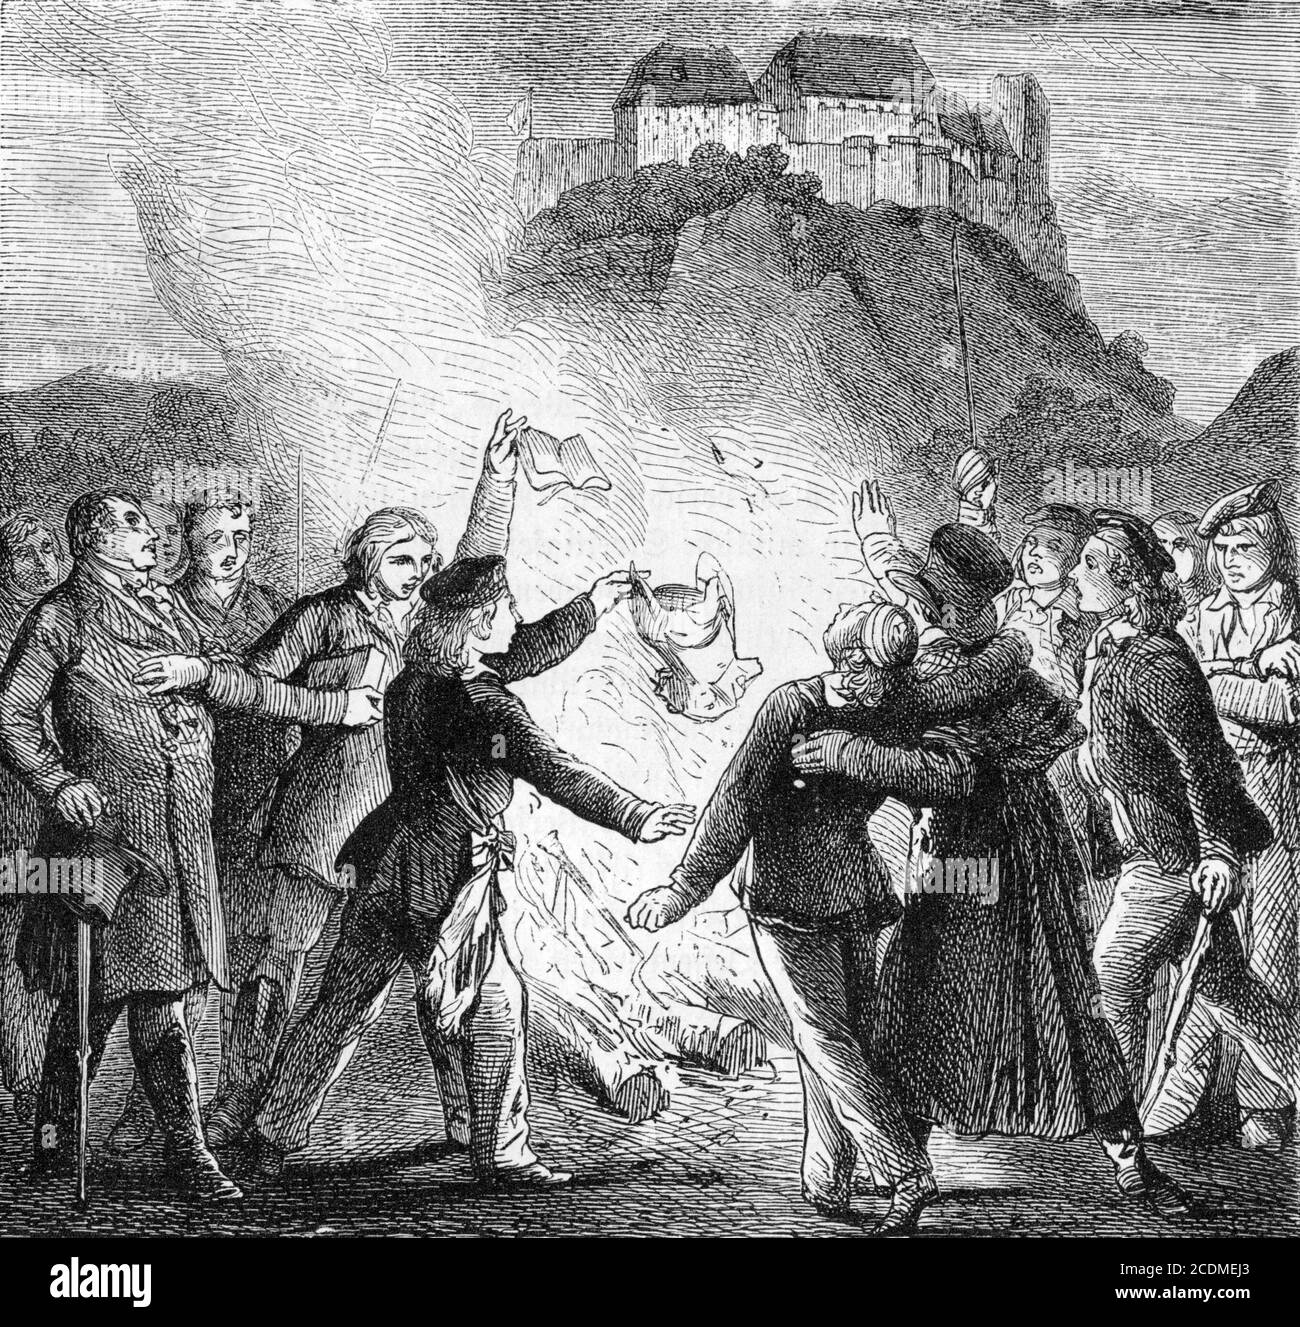 Burning of books at the Wartburg festival in 1817, historical illustration from Otto von Leixner: Illustrated history of German literature. Leipzig Stock Photo